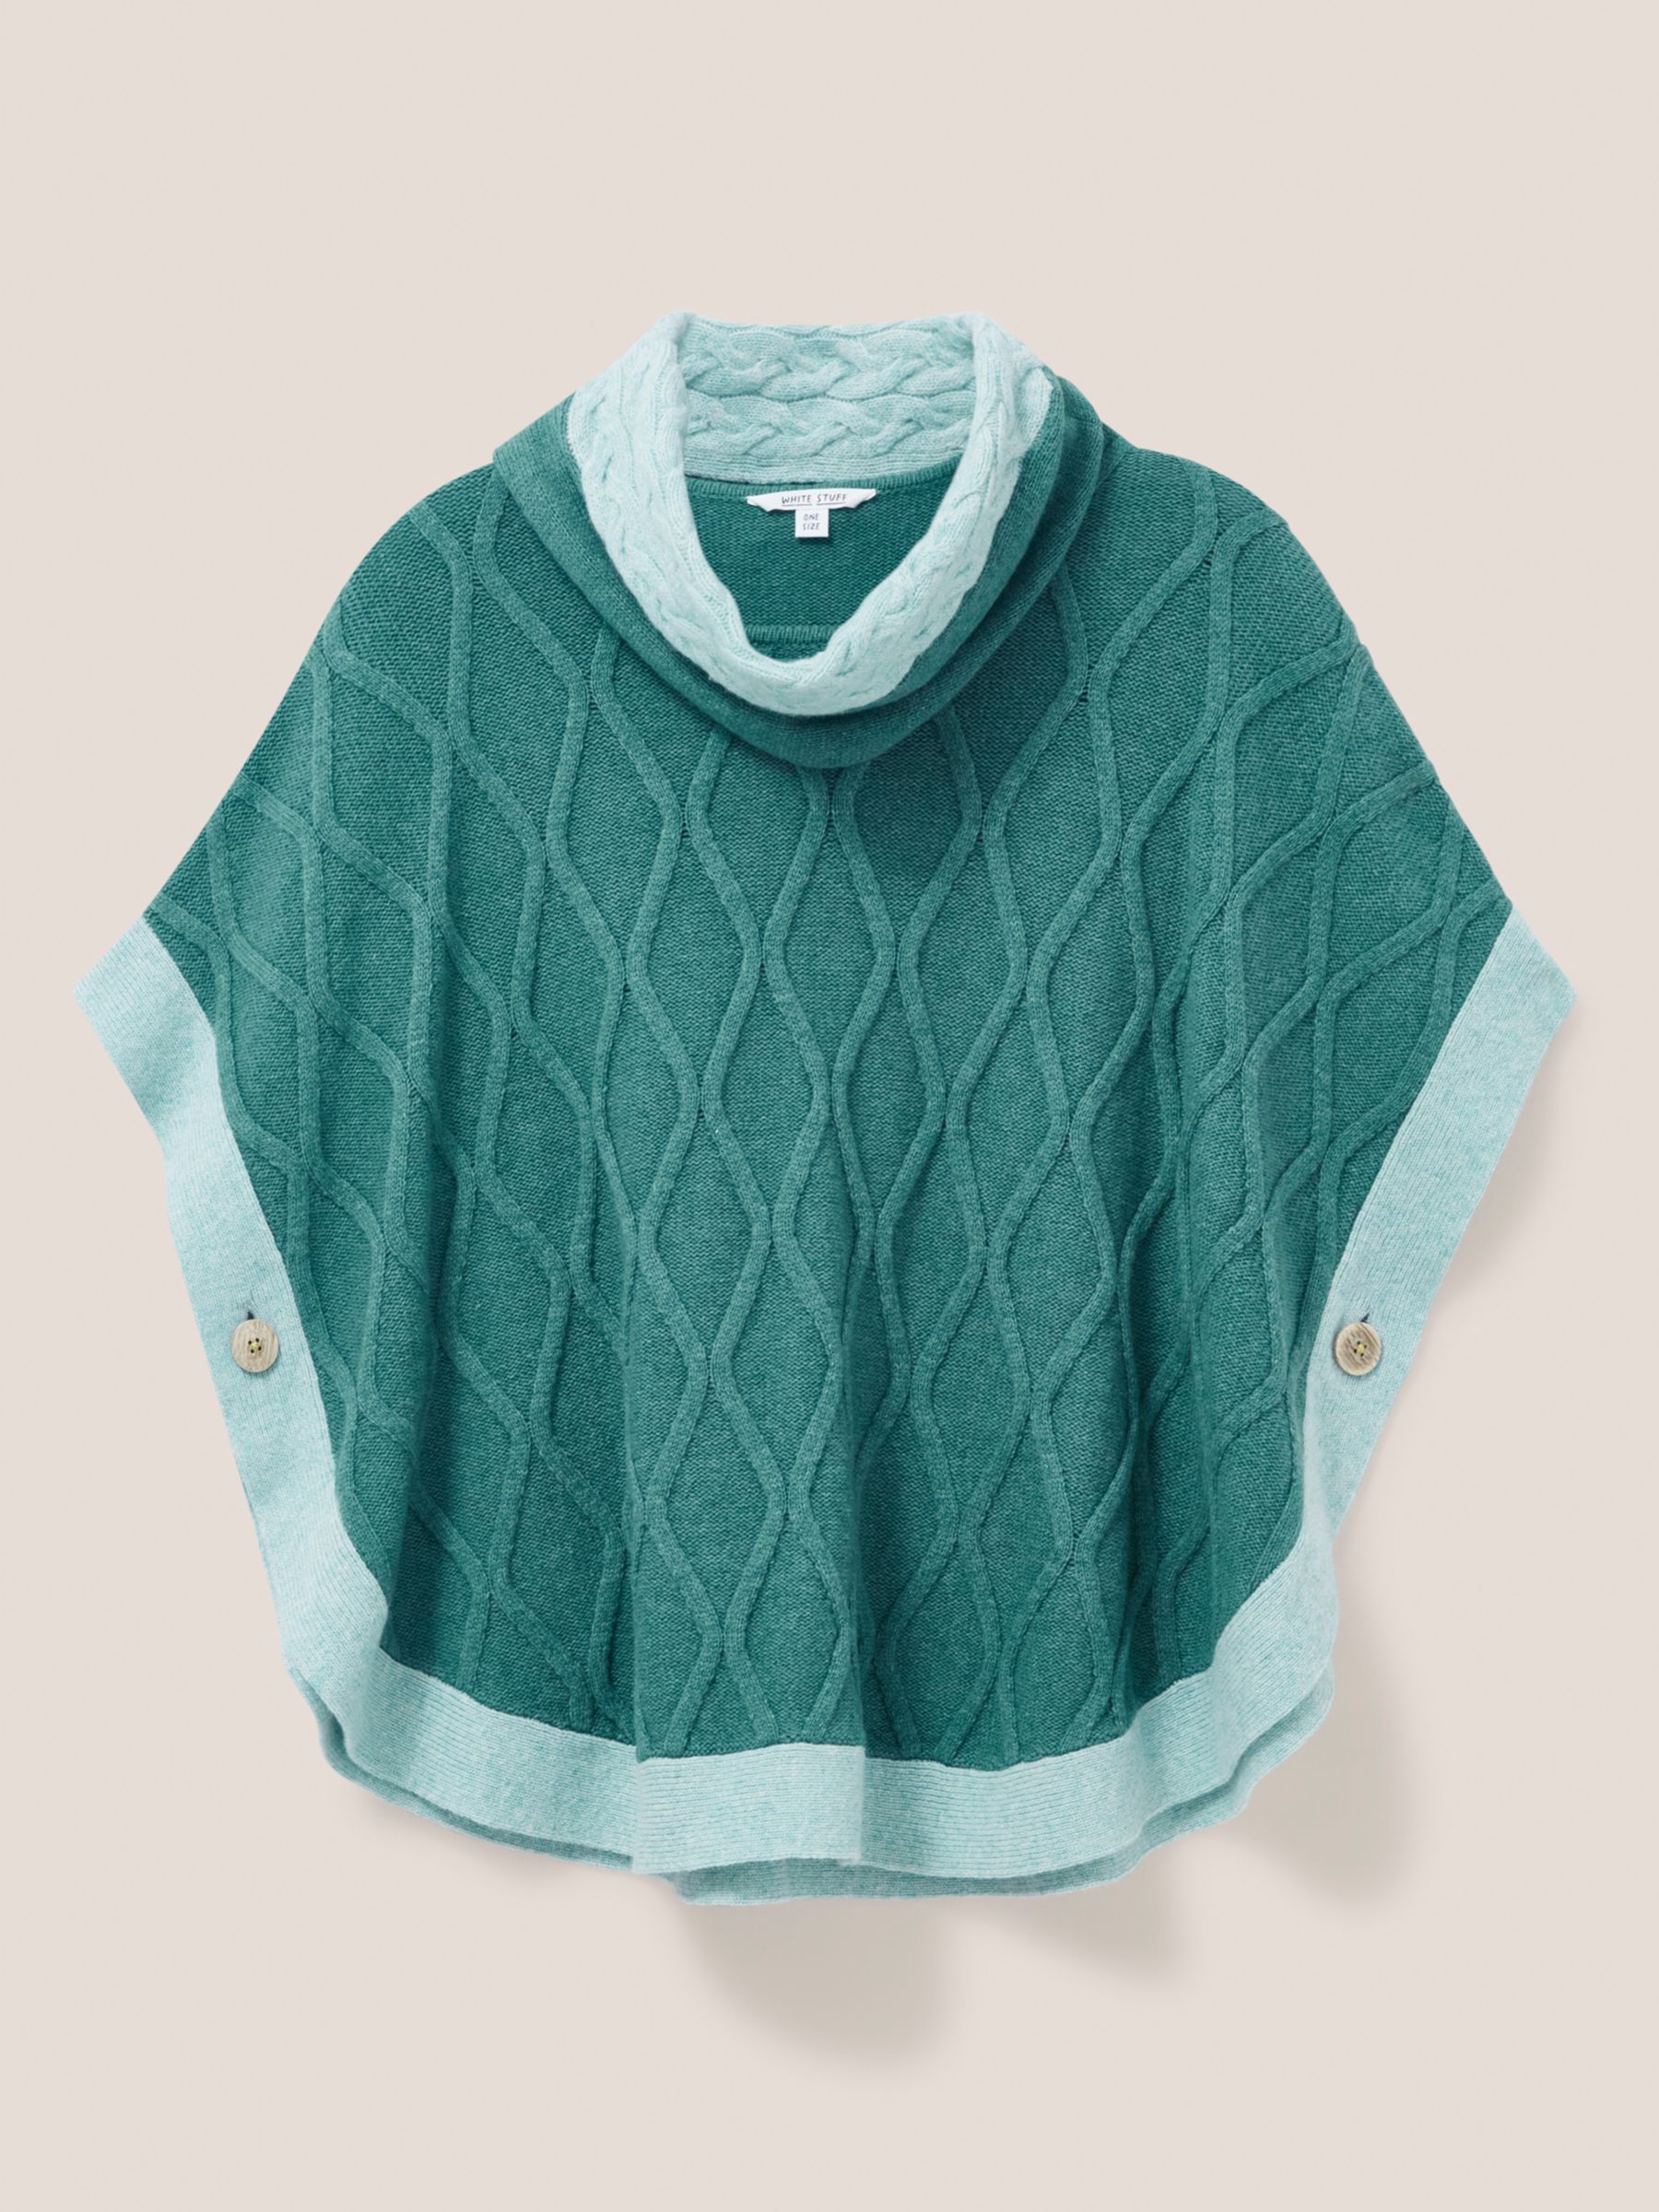 White Stuff Fern Knitted Lambswool Blend Poncho, Mid Teal, One Size